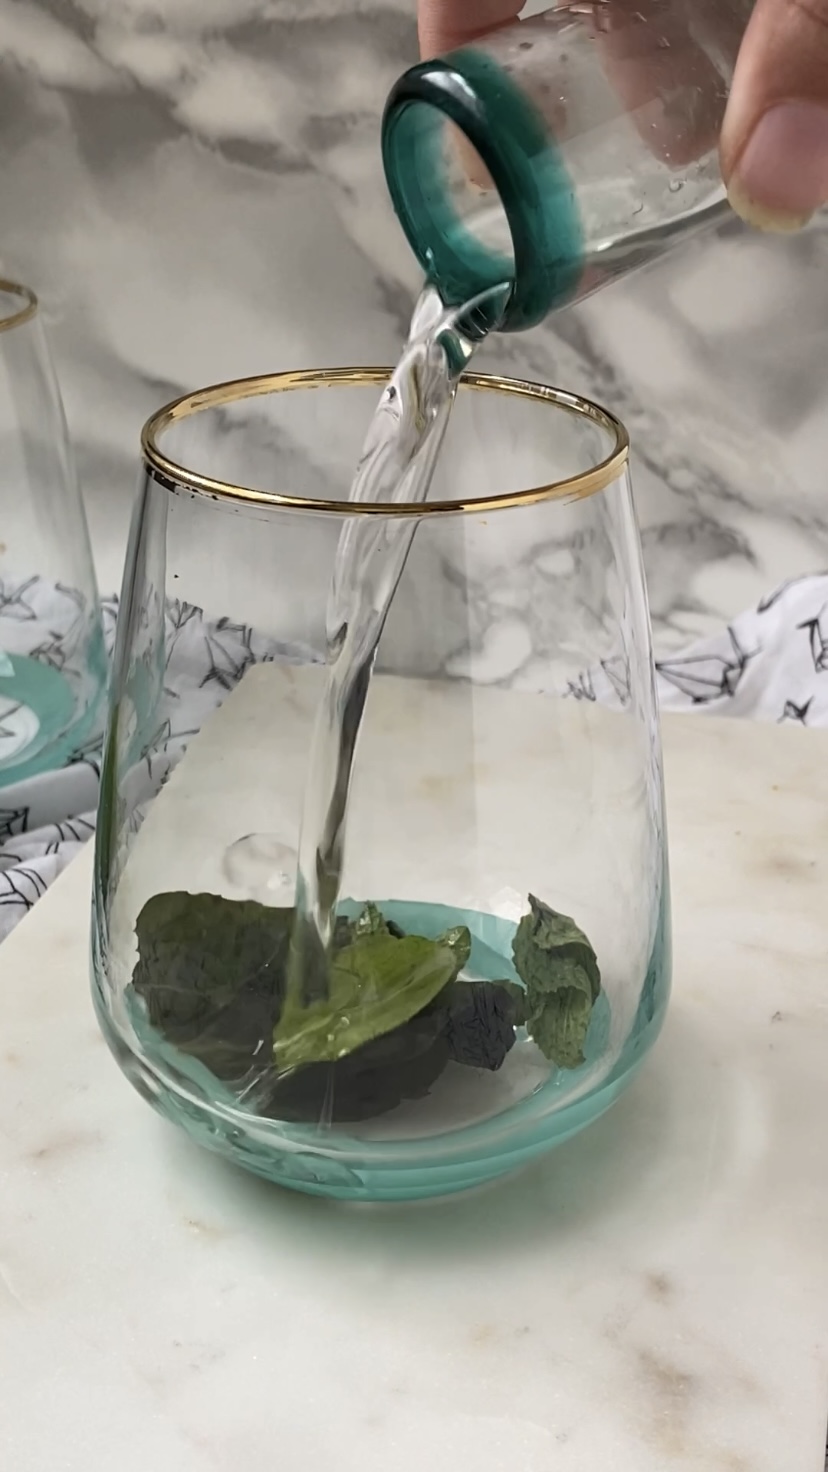 Adding simple syrup to a cocktail glass of mint leaves.